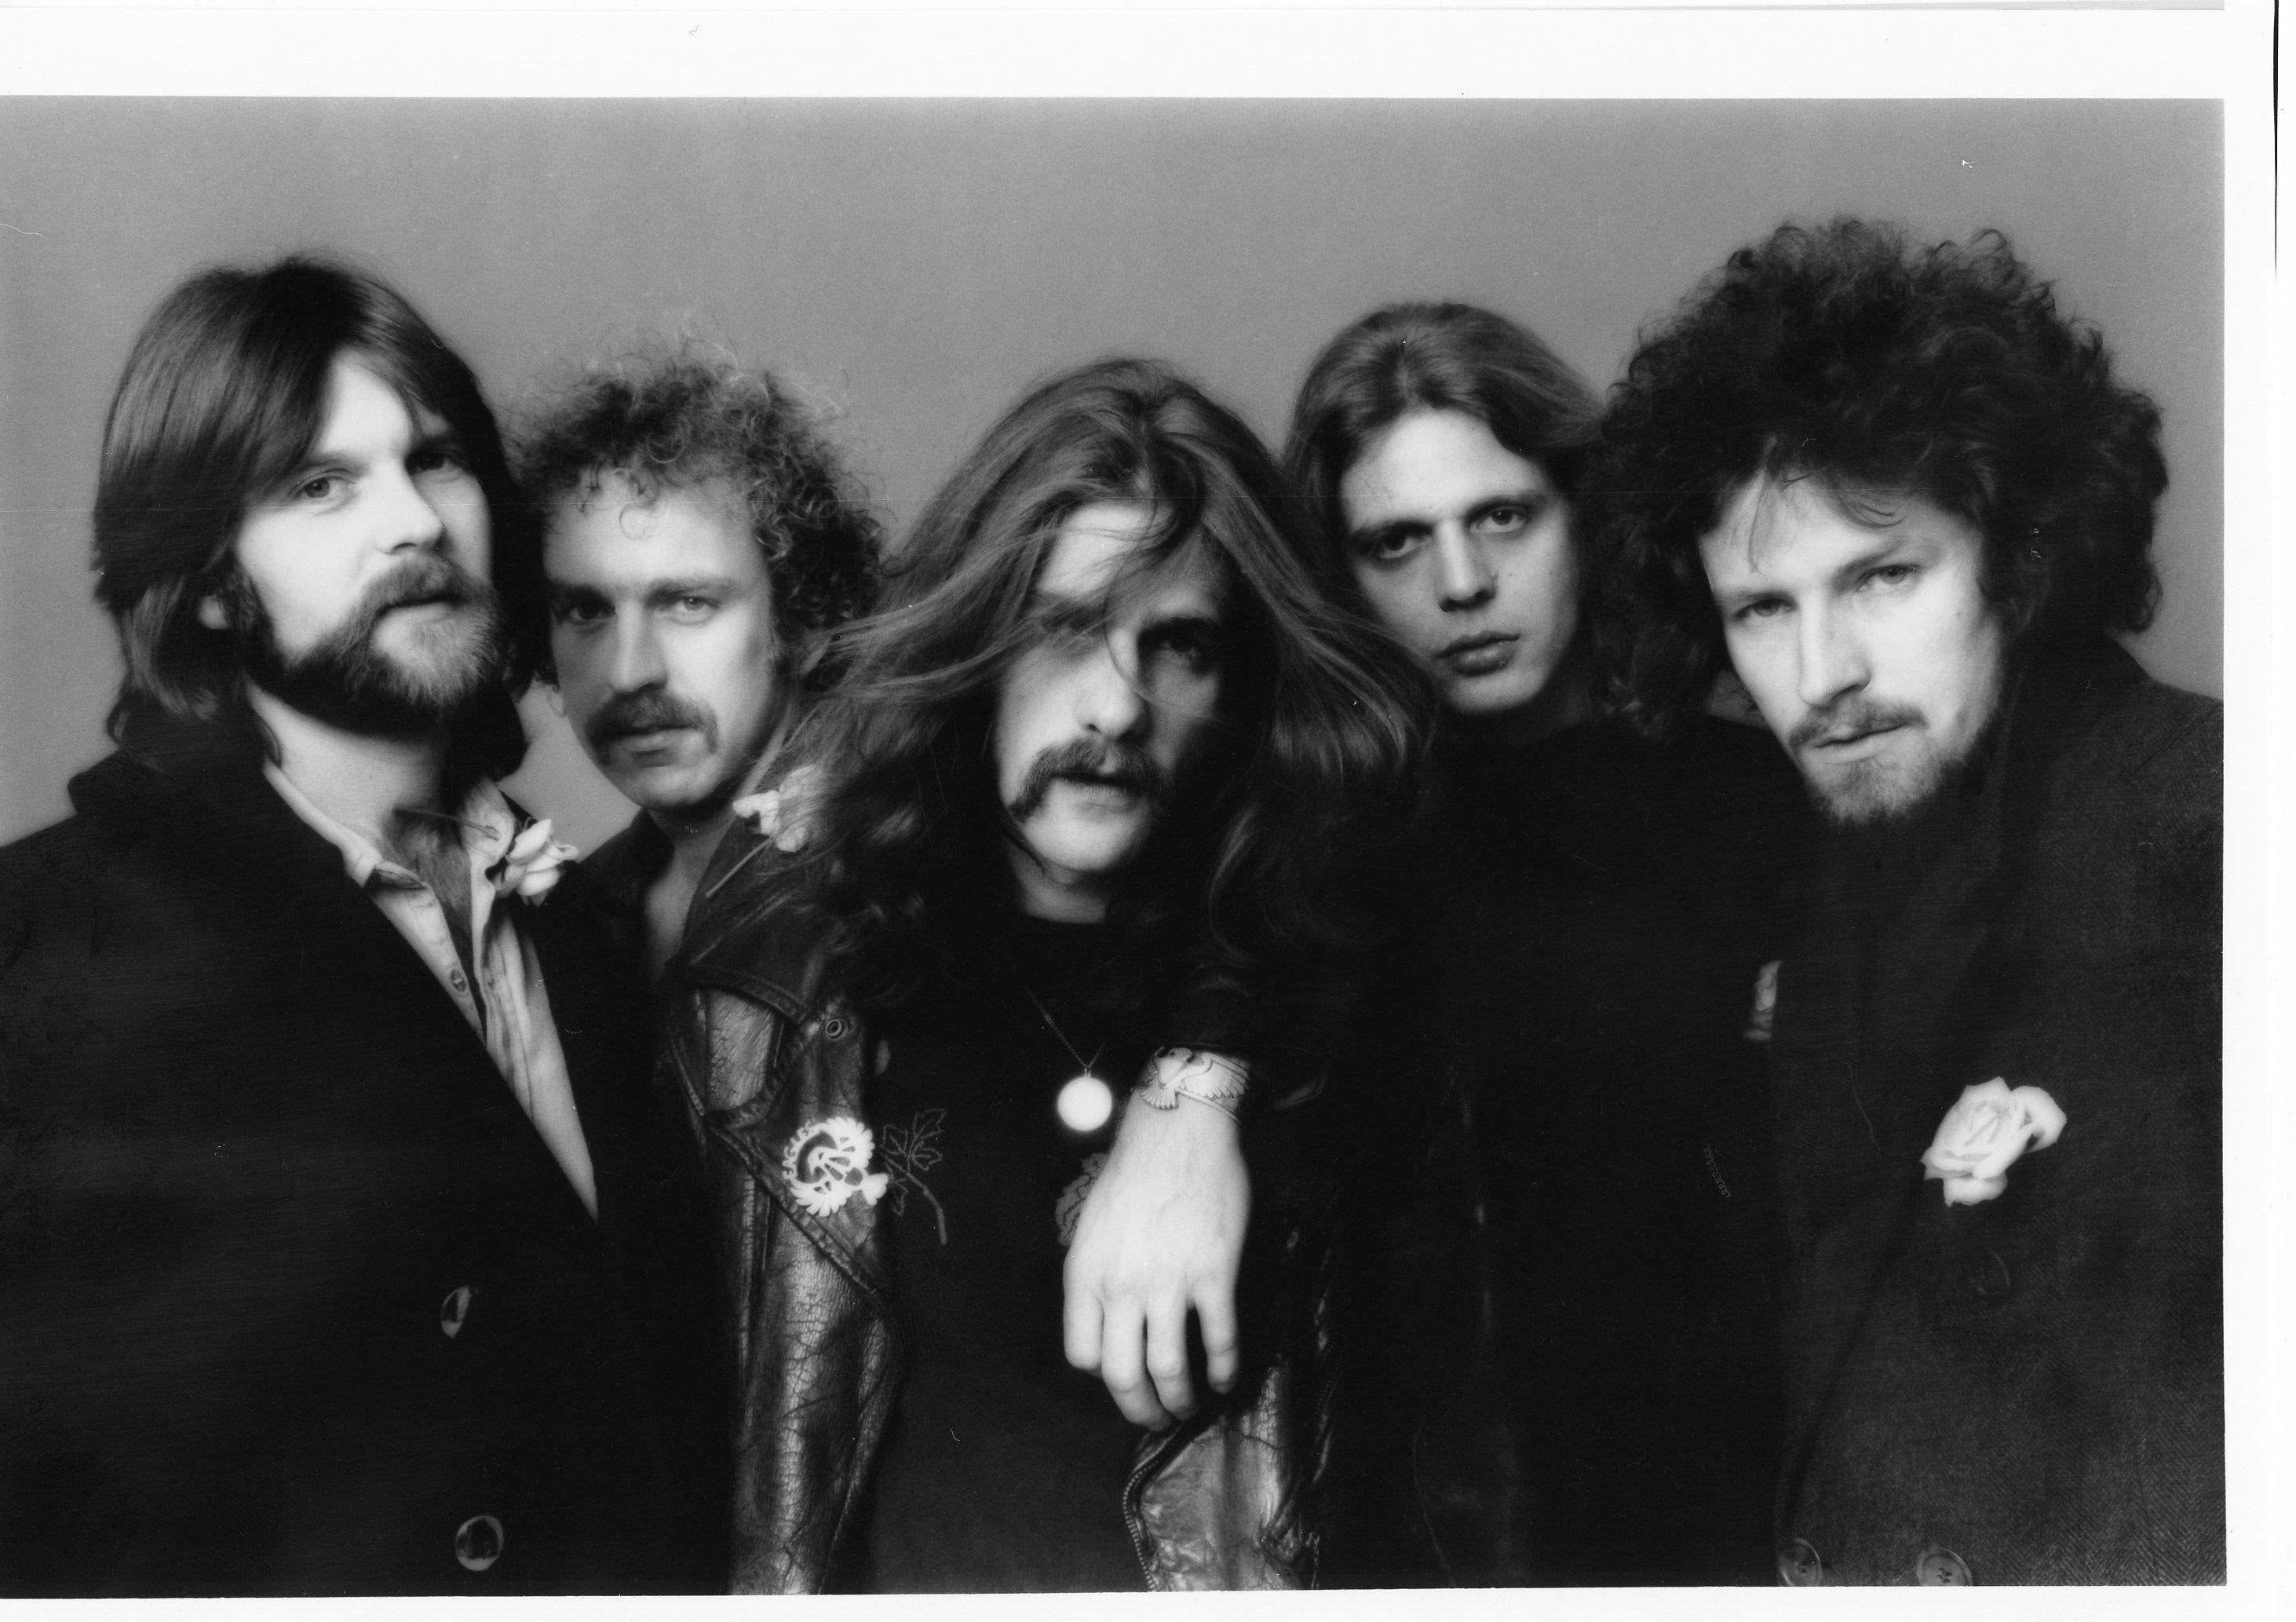 Original vintage 8x10” work print from Norman Seeff of The Eagles. Hand-printed at the time of the photoshoot and stamped with the official Norman Seeff studio stamp.


In excellent condition having been stored flat in a climate controlled